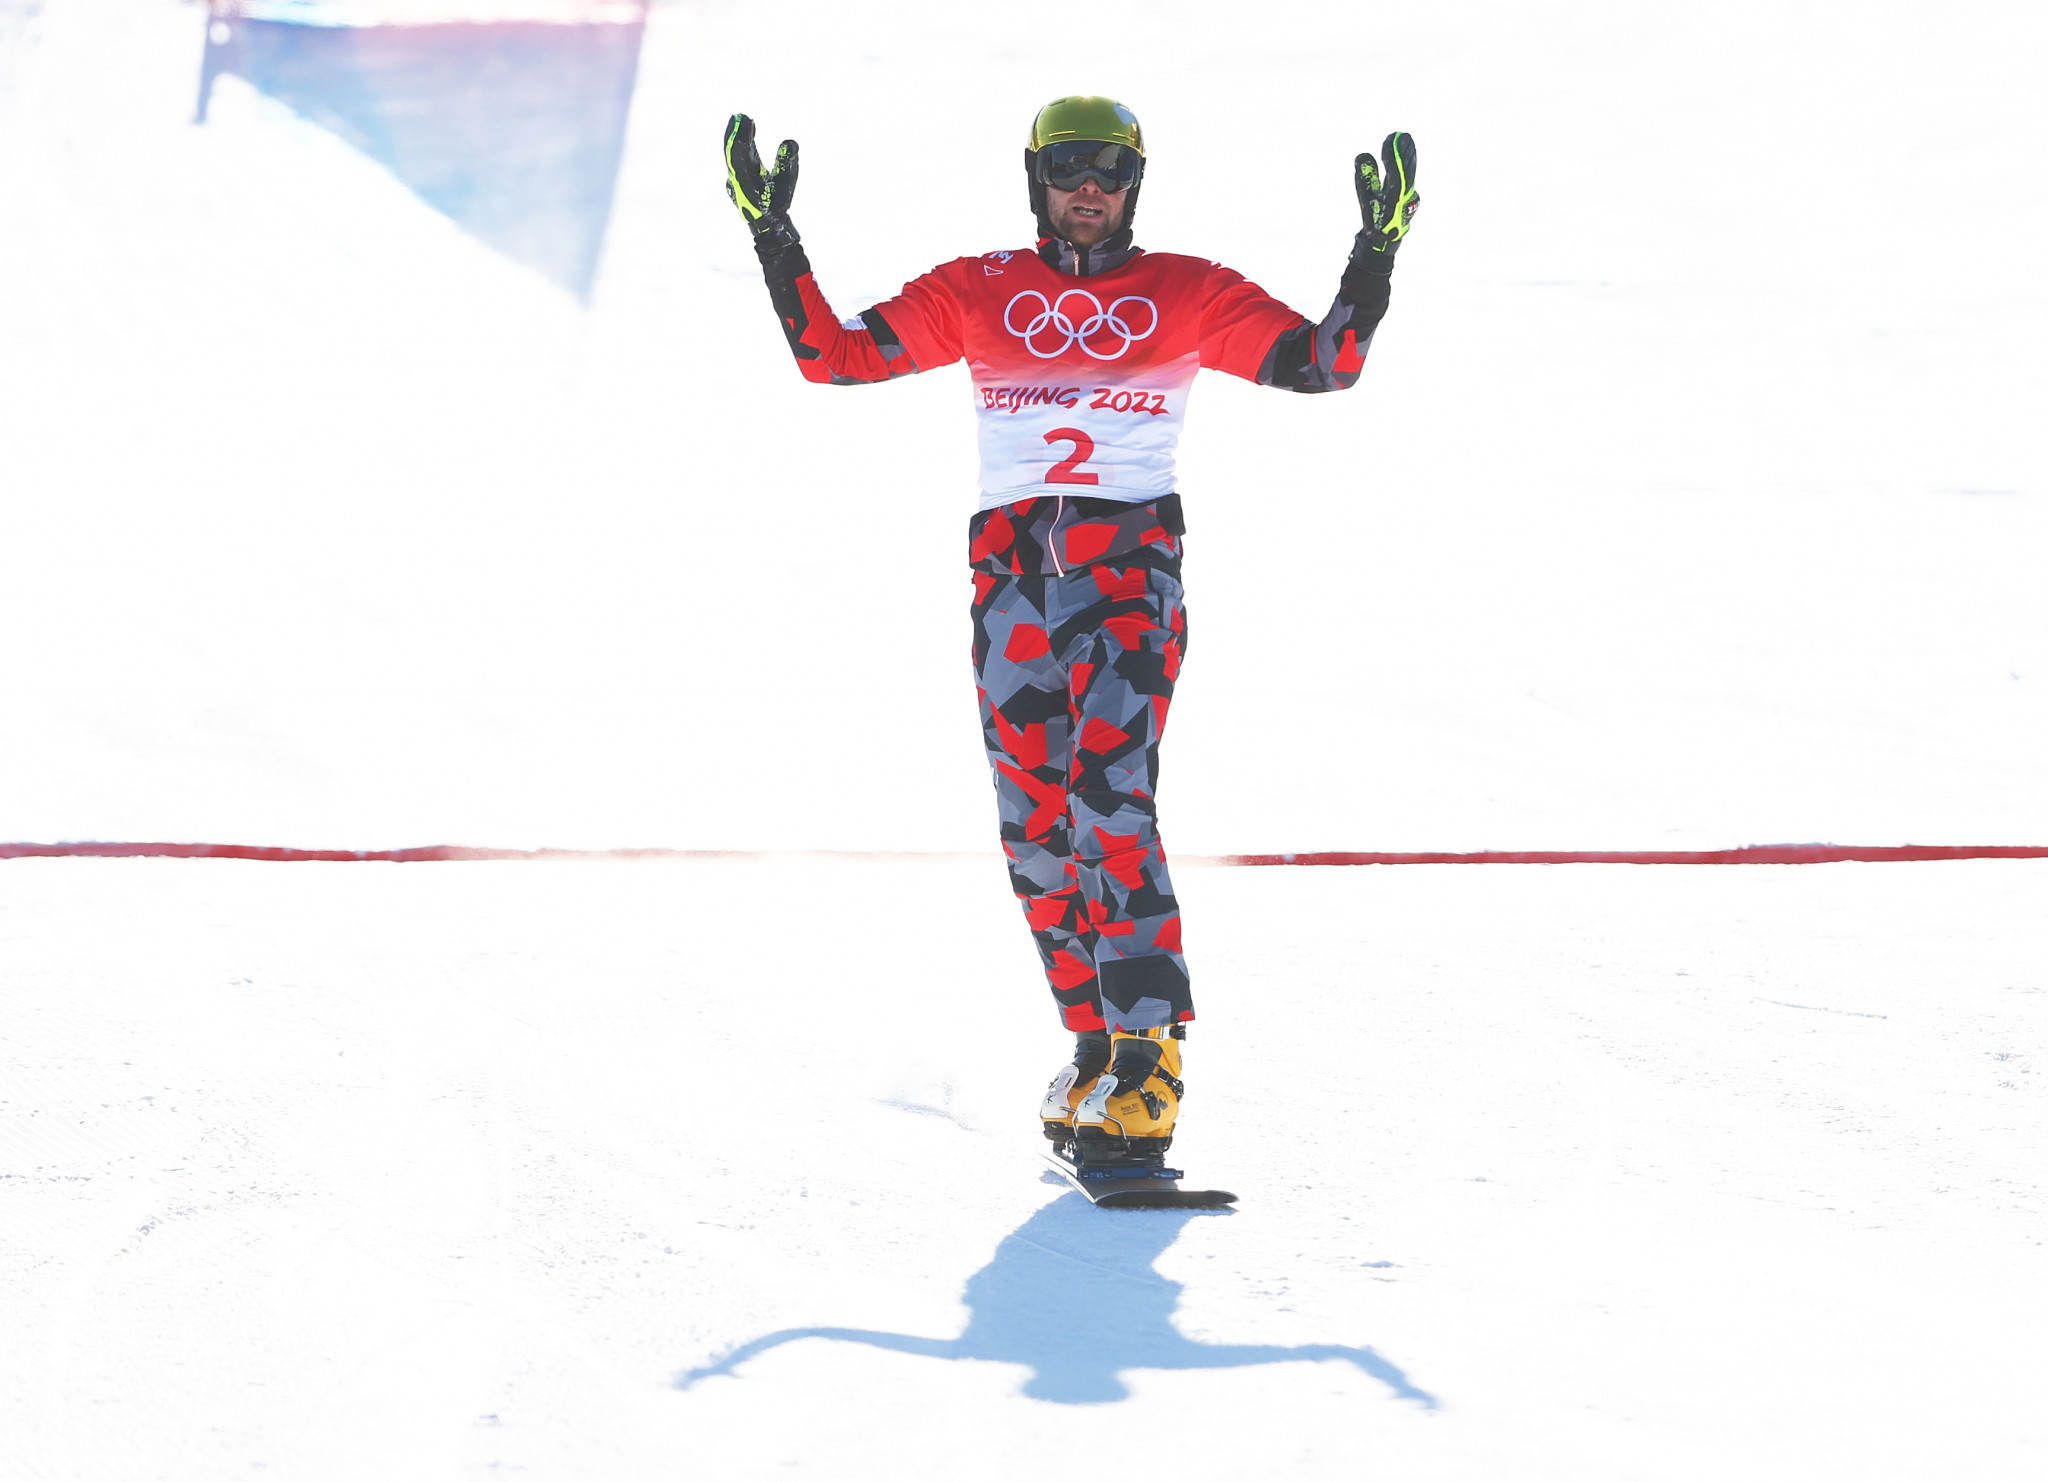 Benjamin Karl of Austria won the mixed team parallel slalom in Piancavallo along with compatriot Daniela Ulbing ©Getty Images